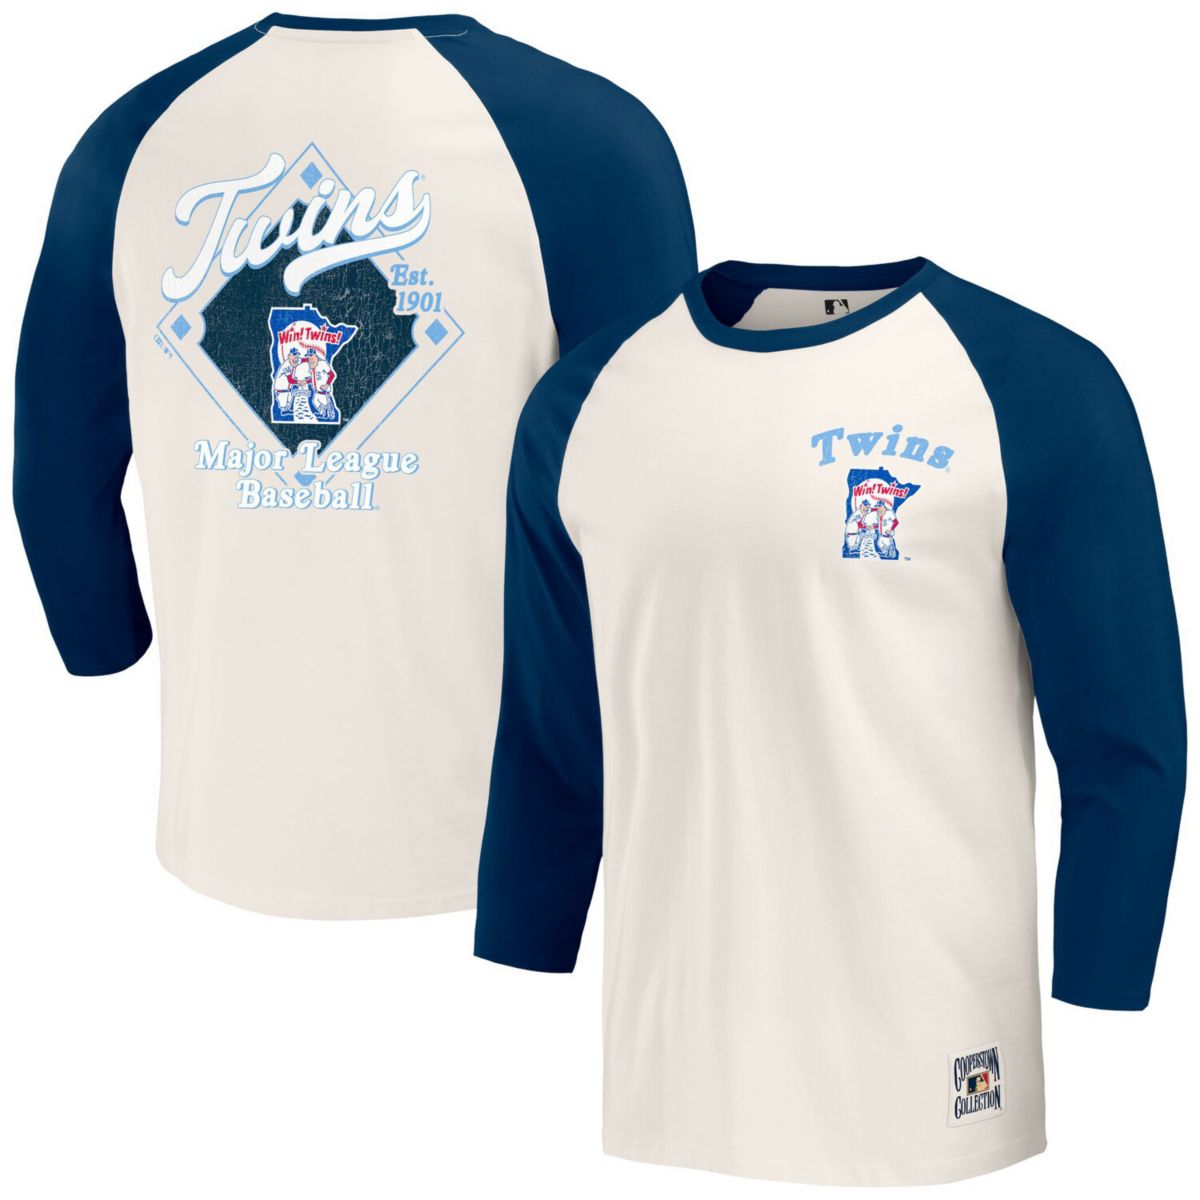 Men's Darius Rucker Collection by Fanatics Navy/White Minnesota Twins Cooperstown Collection Raglan 3/4-Sleeve T-Shirt Darius Rucker Collection by Fanatics